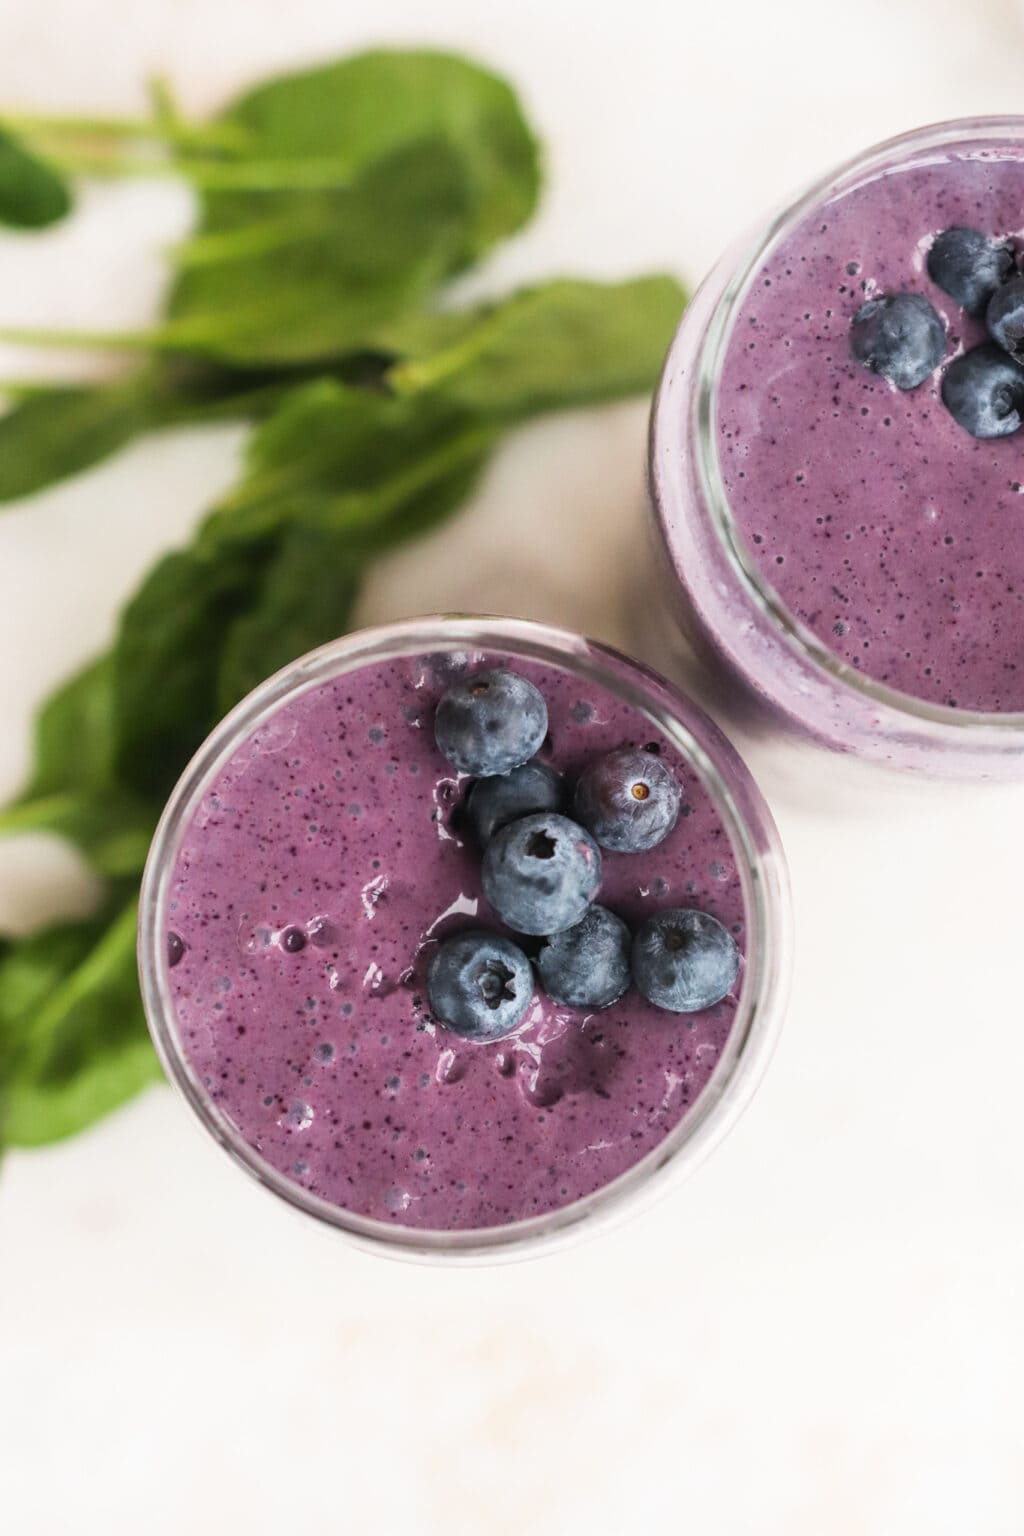 Two clear glasses filled with High Protein Blueberry Breakfast Smoothie with Cottage Cheese on a cutting board with spinach on the side